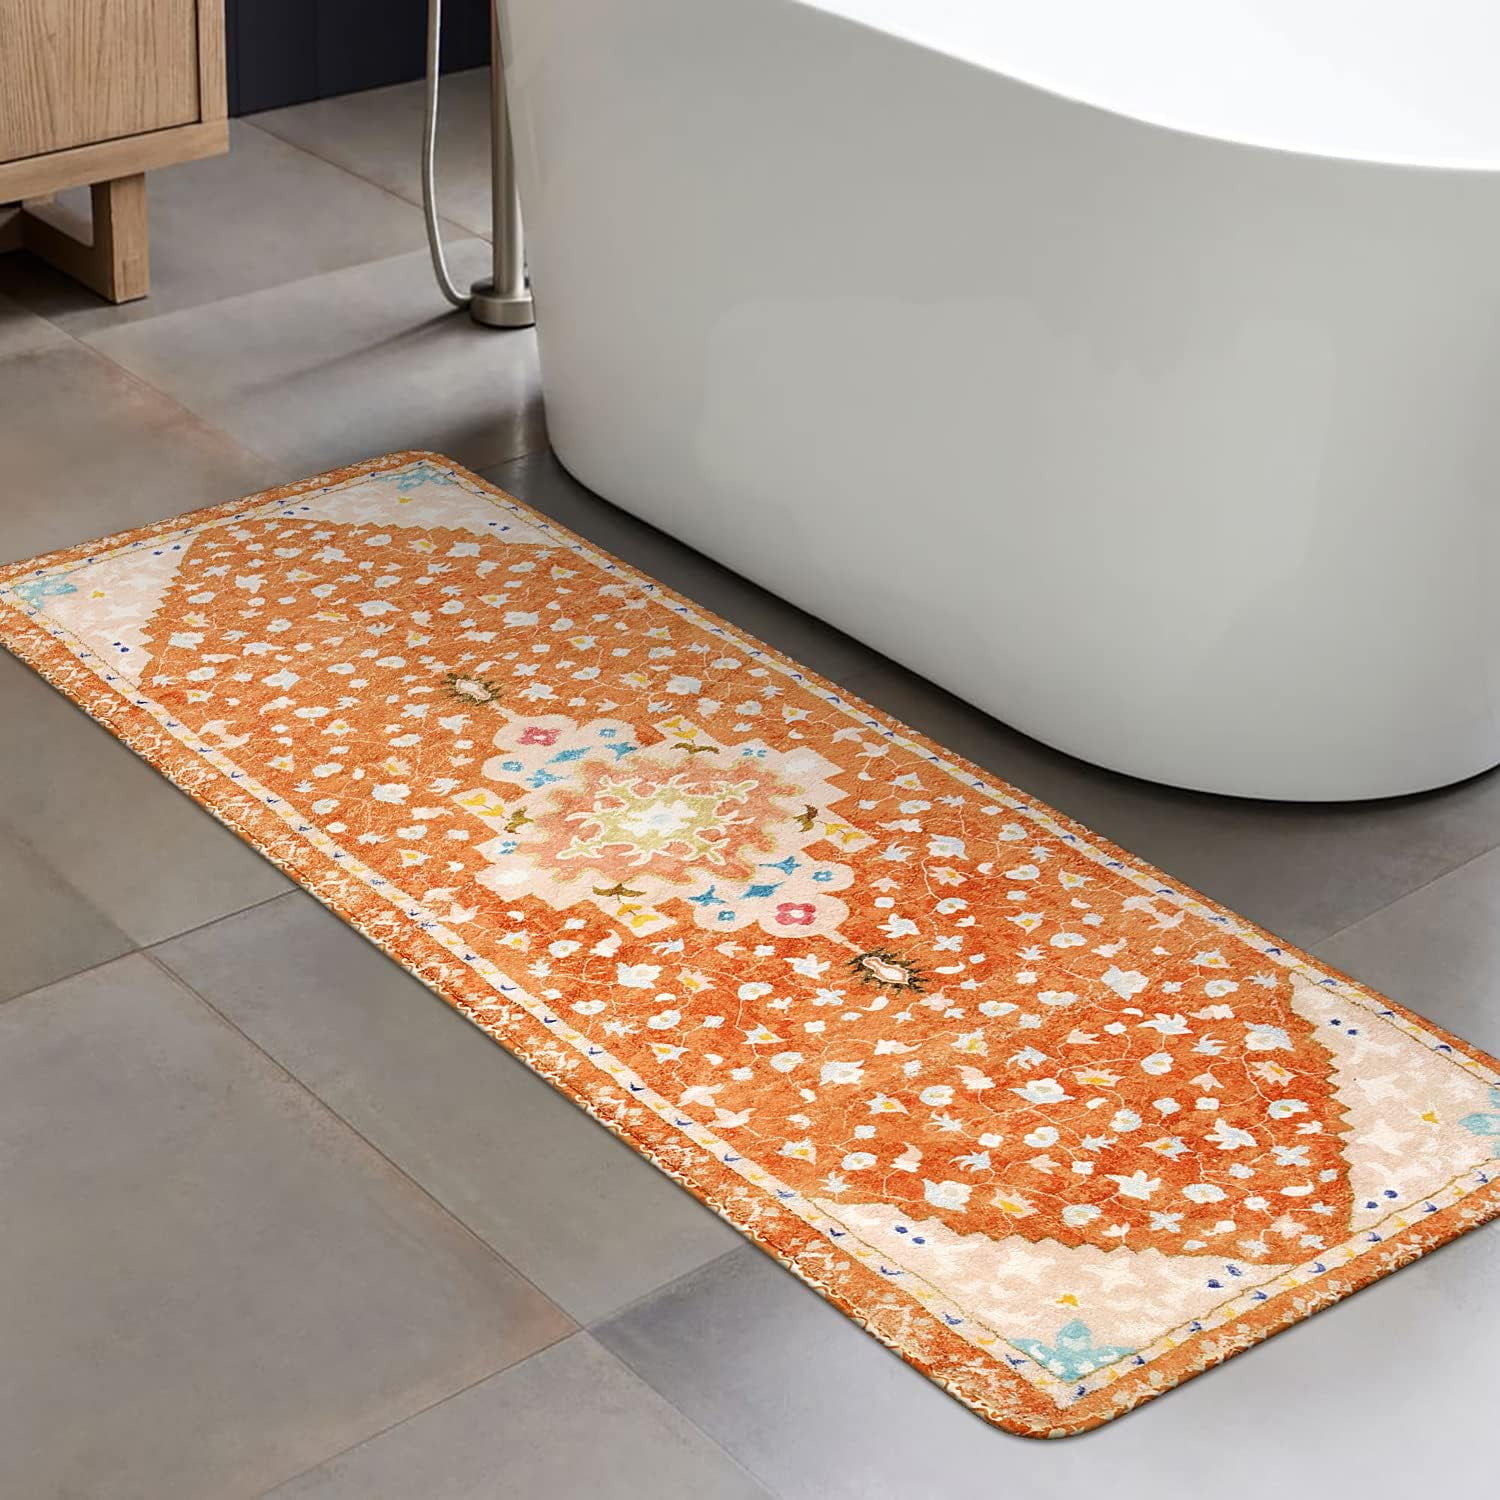 How to Maintain a Vintage Rug in the Bathroom - BREPURPOSED